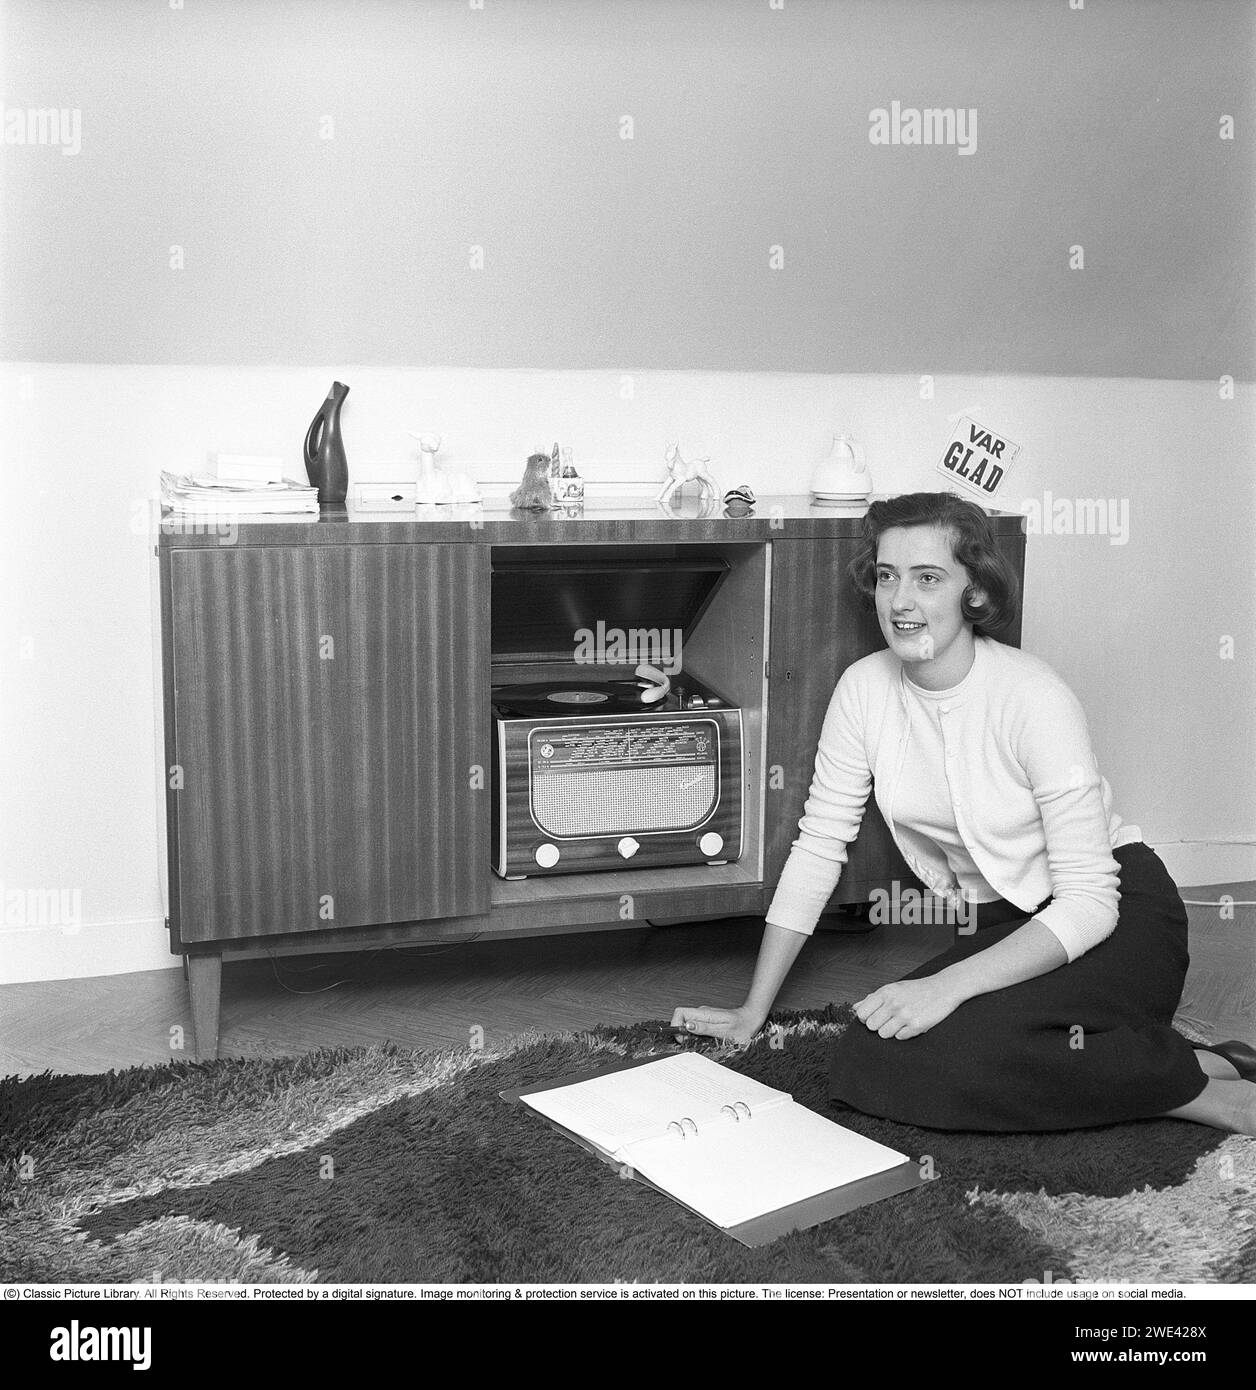 In the 1950s. A radio gramophone from the manufacturer Centrum radio. A combined piece of music furniture where a gramophone and radio were put together. The model became popular in the 1950s. The construction made them big and heavy, with more lavish details in the wooden construction. A young woman sits on the floor and listens to the music. Be happy reads the text on the sign on the wall. Sweden 1956. Svahn ref SVA1 Stock Photo